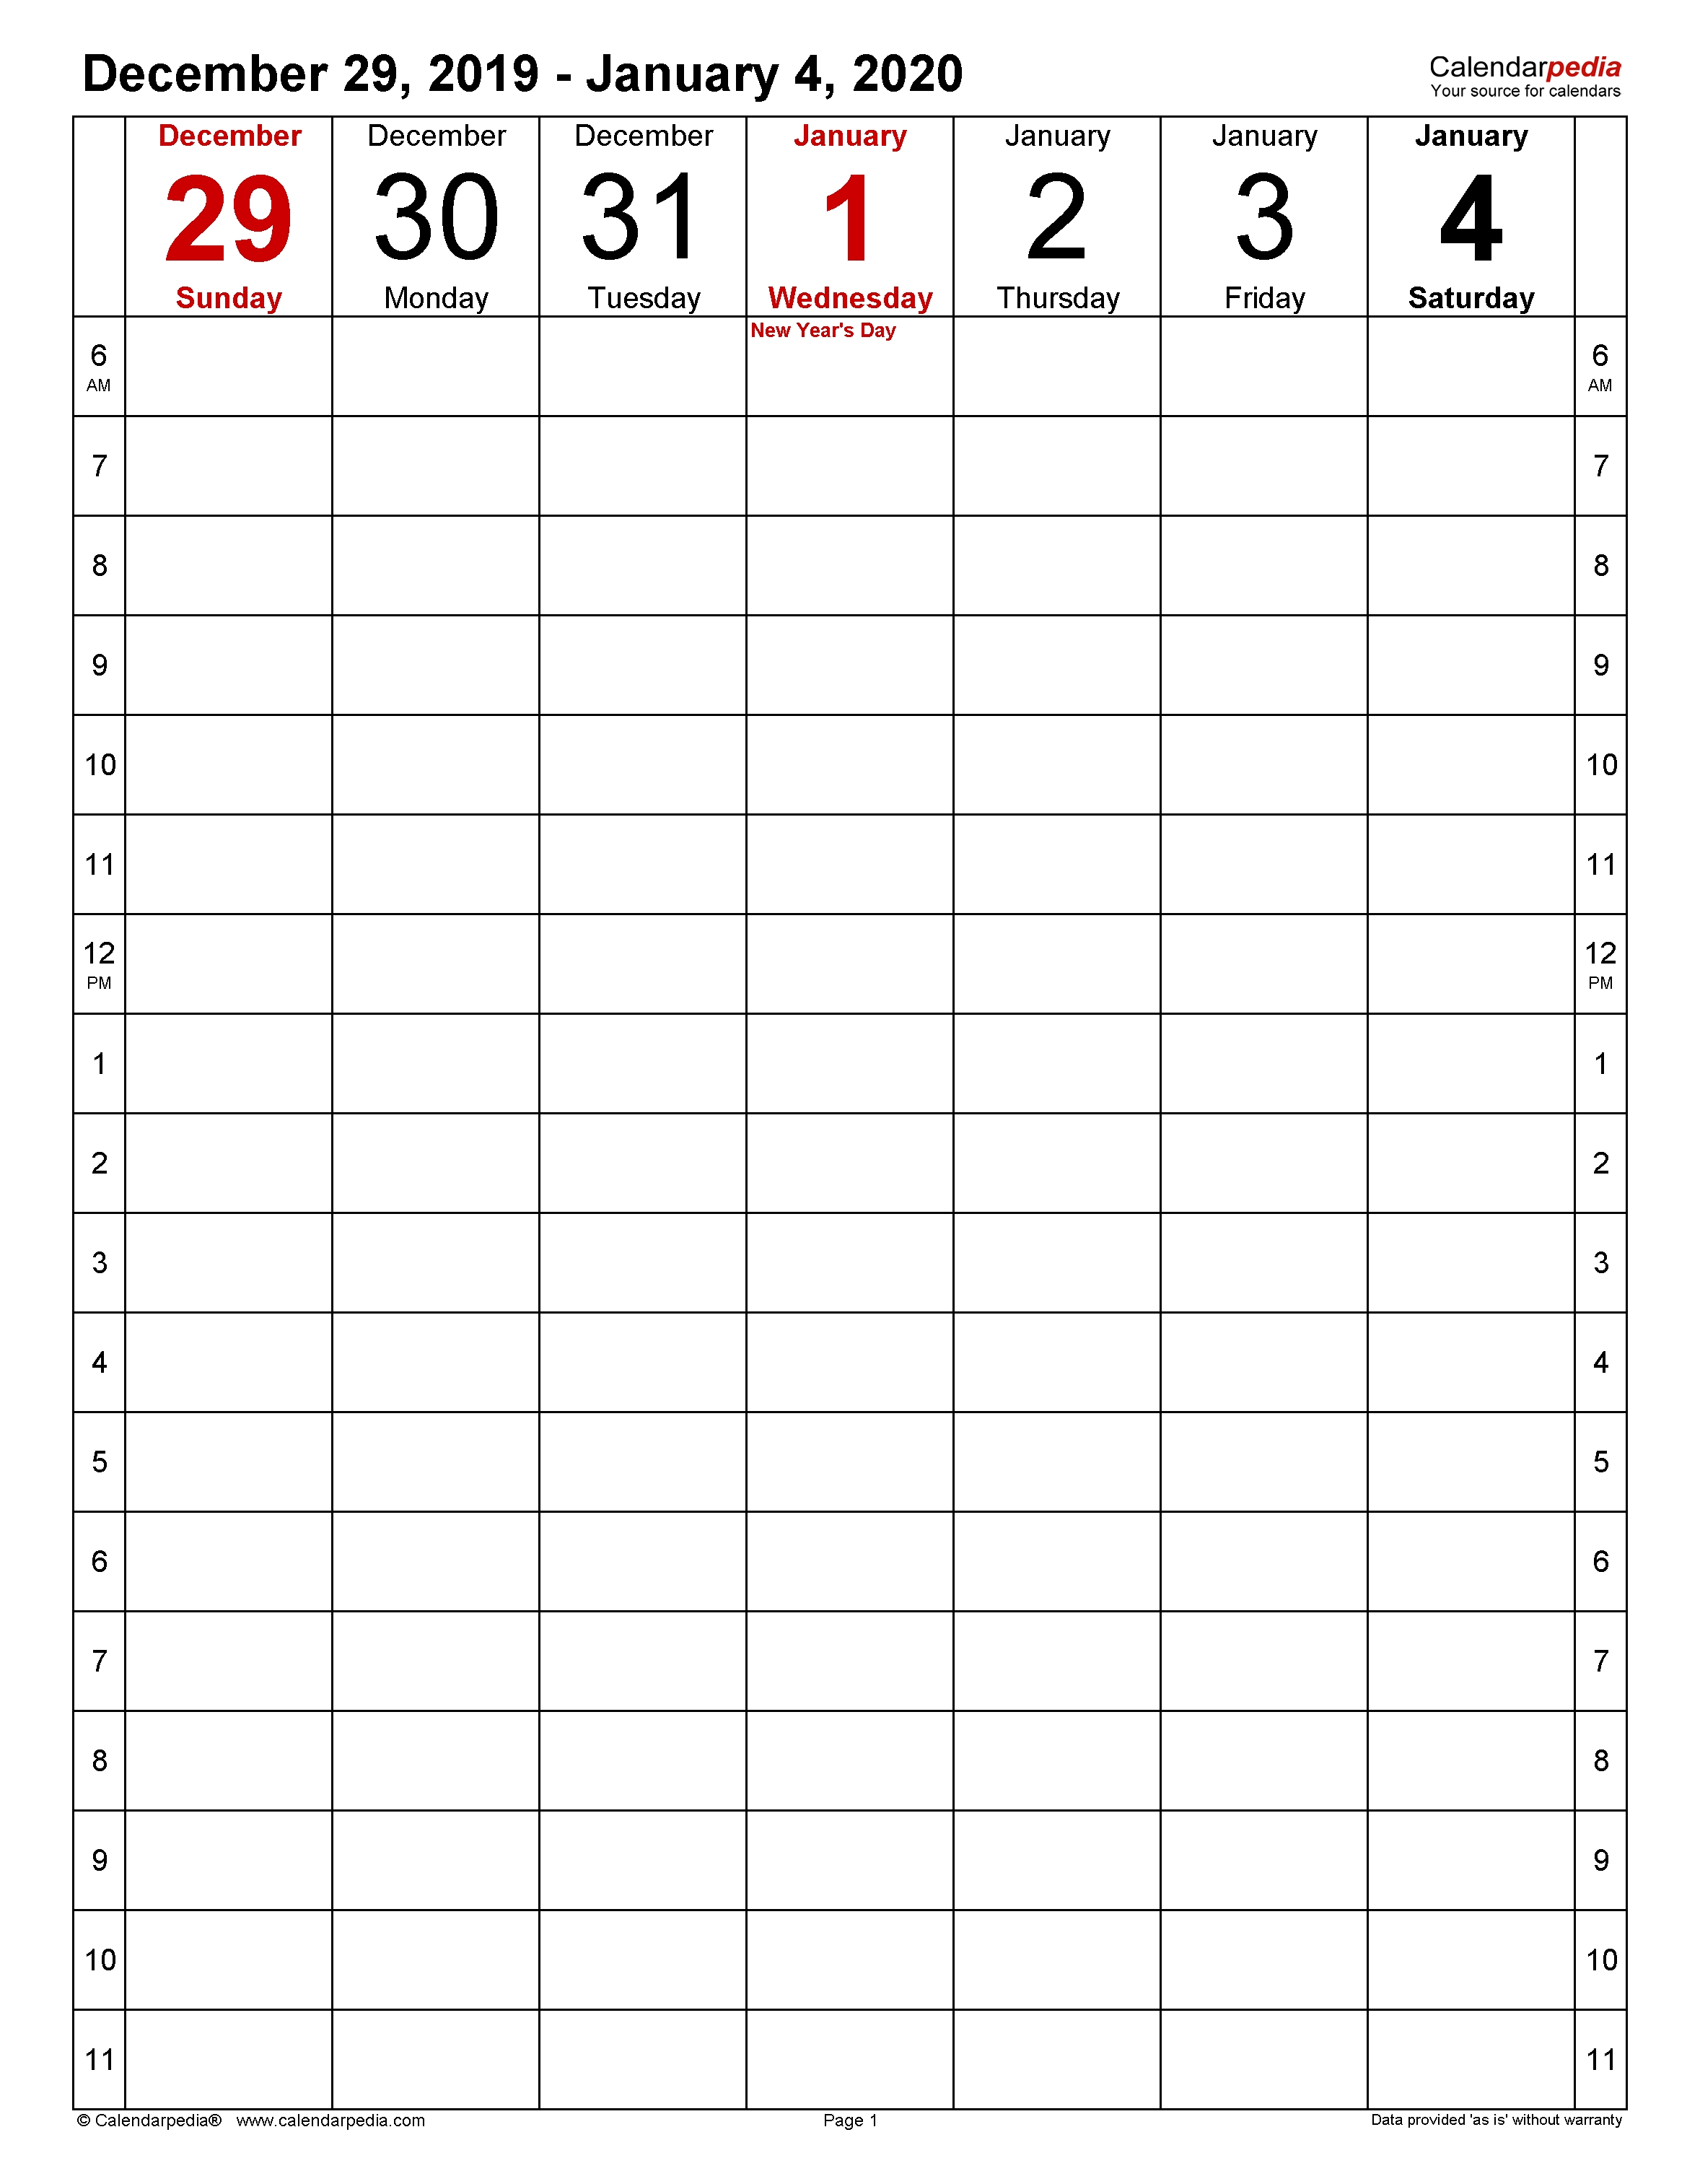 Weekly Calendars 2020 For Word - 12 Free Printable Templates with 2020 Calendar Format Monday Through Friday Week